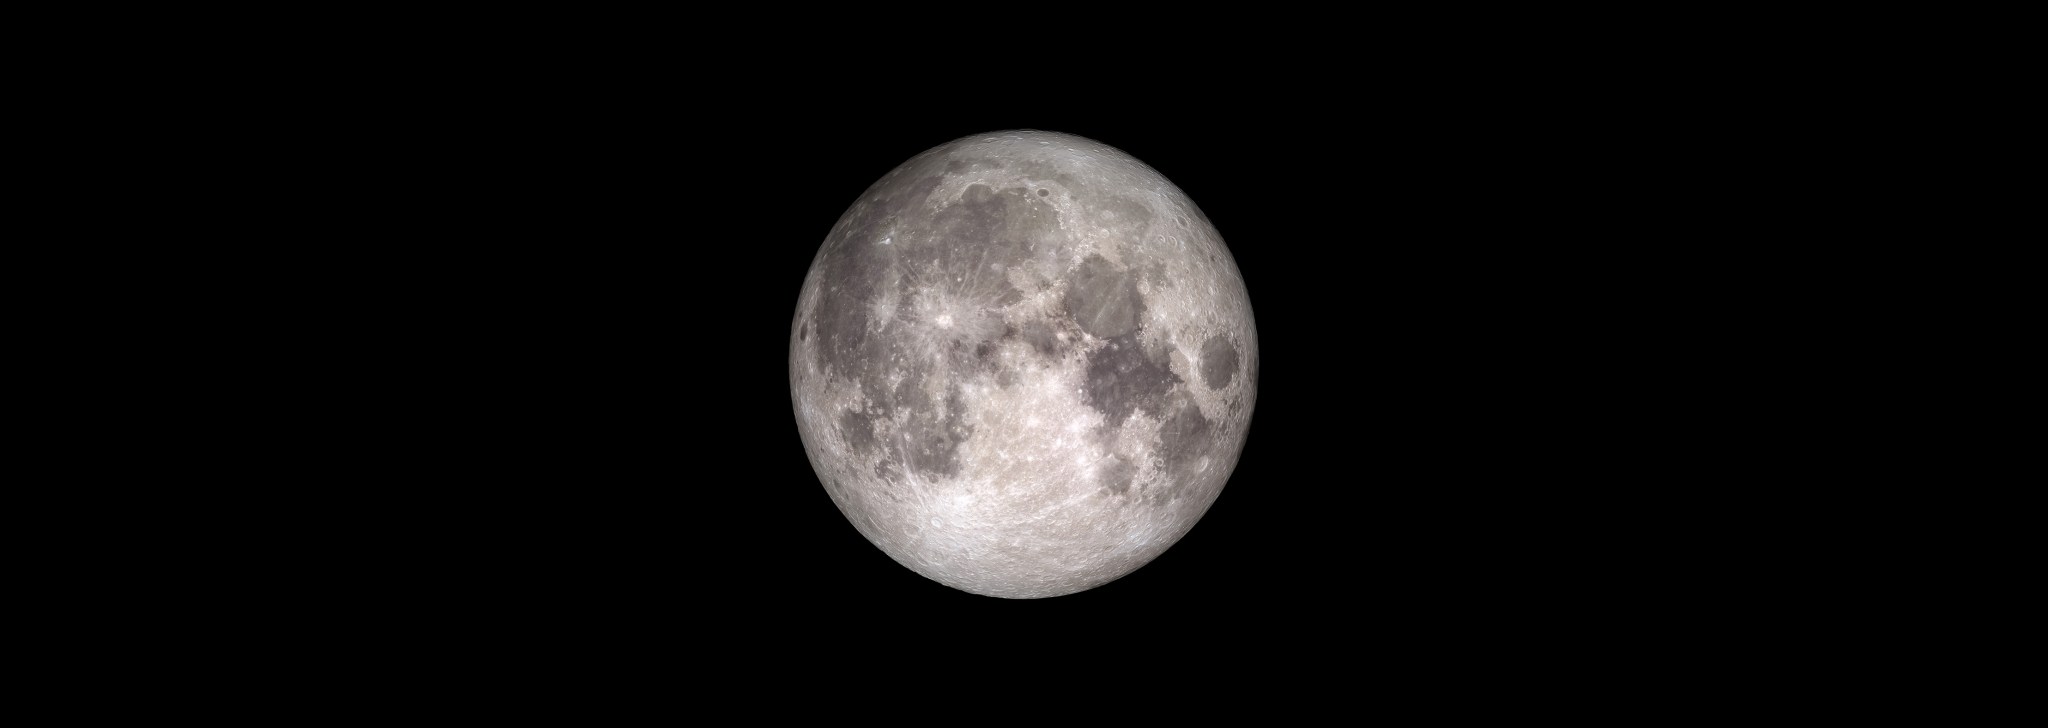 Image of the full Moon